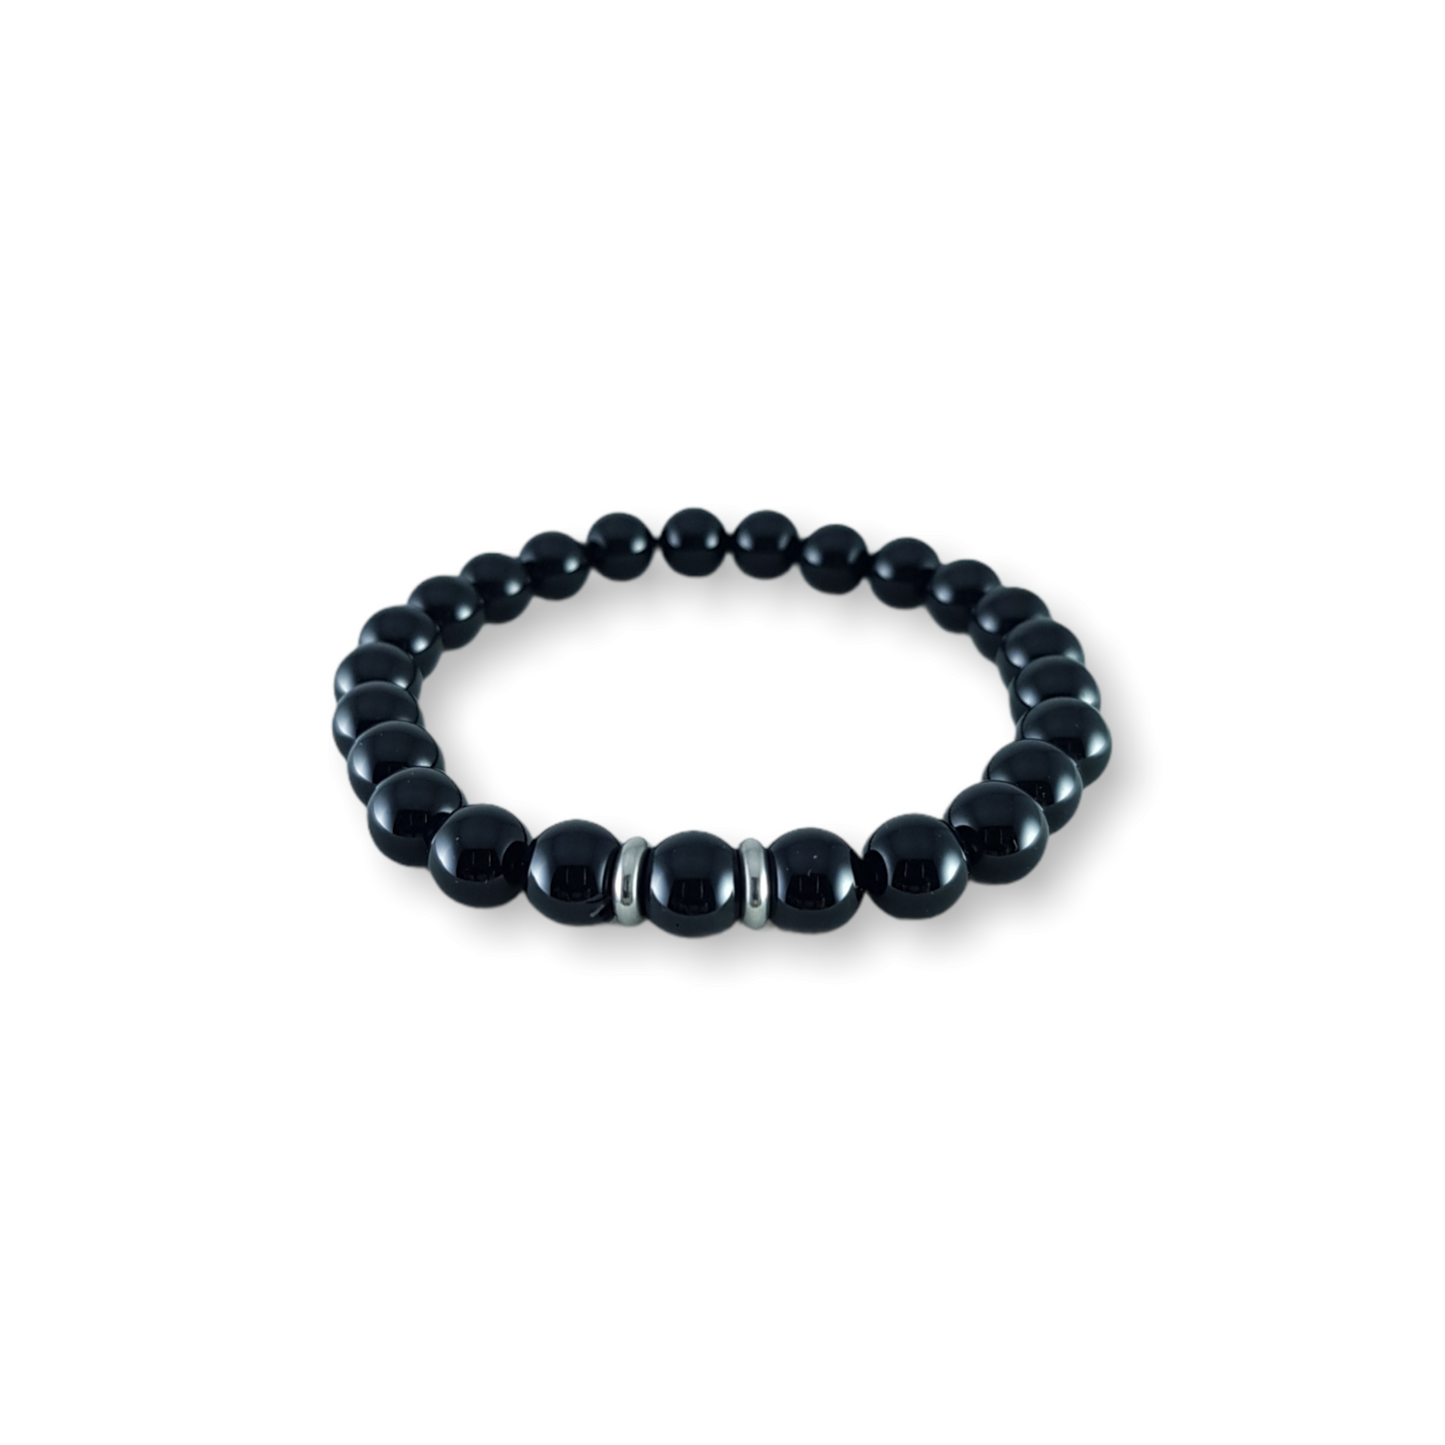 Black Onyx Bracelet Small Bead with Stainless Steel Spacer